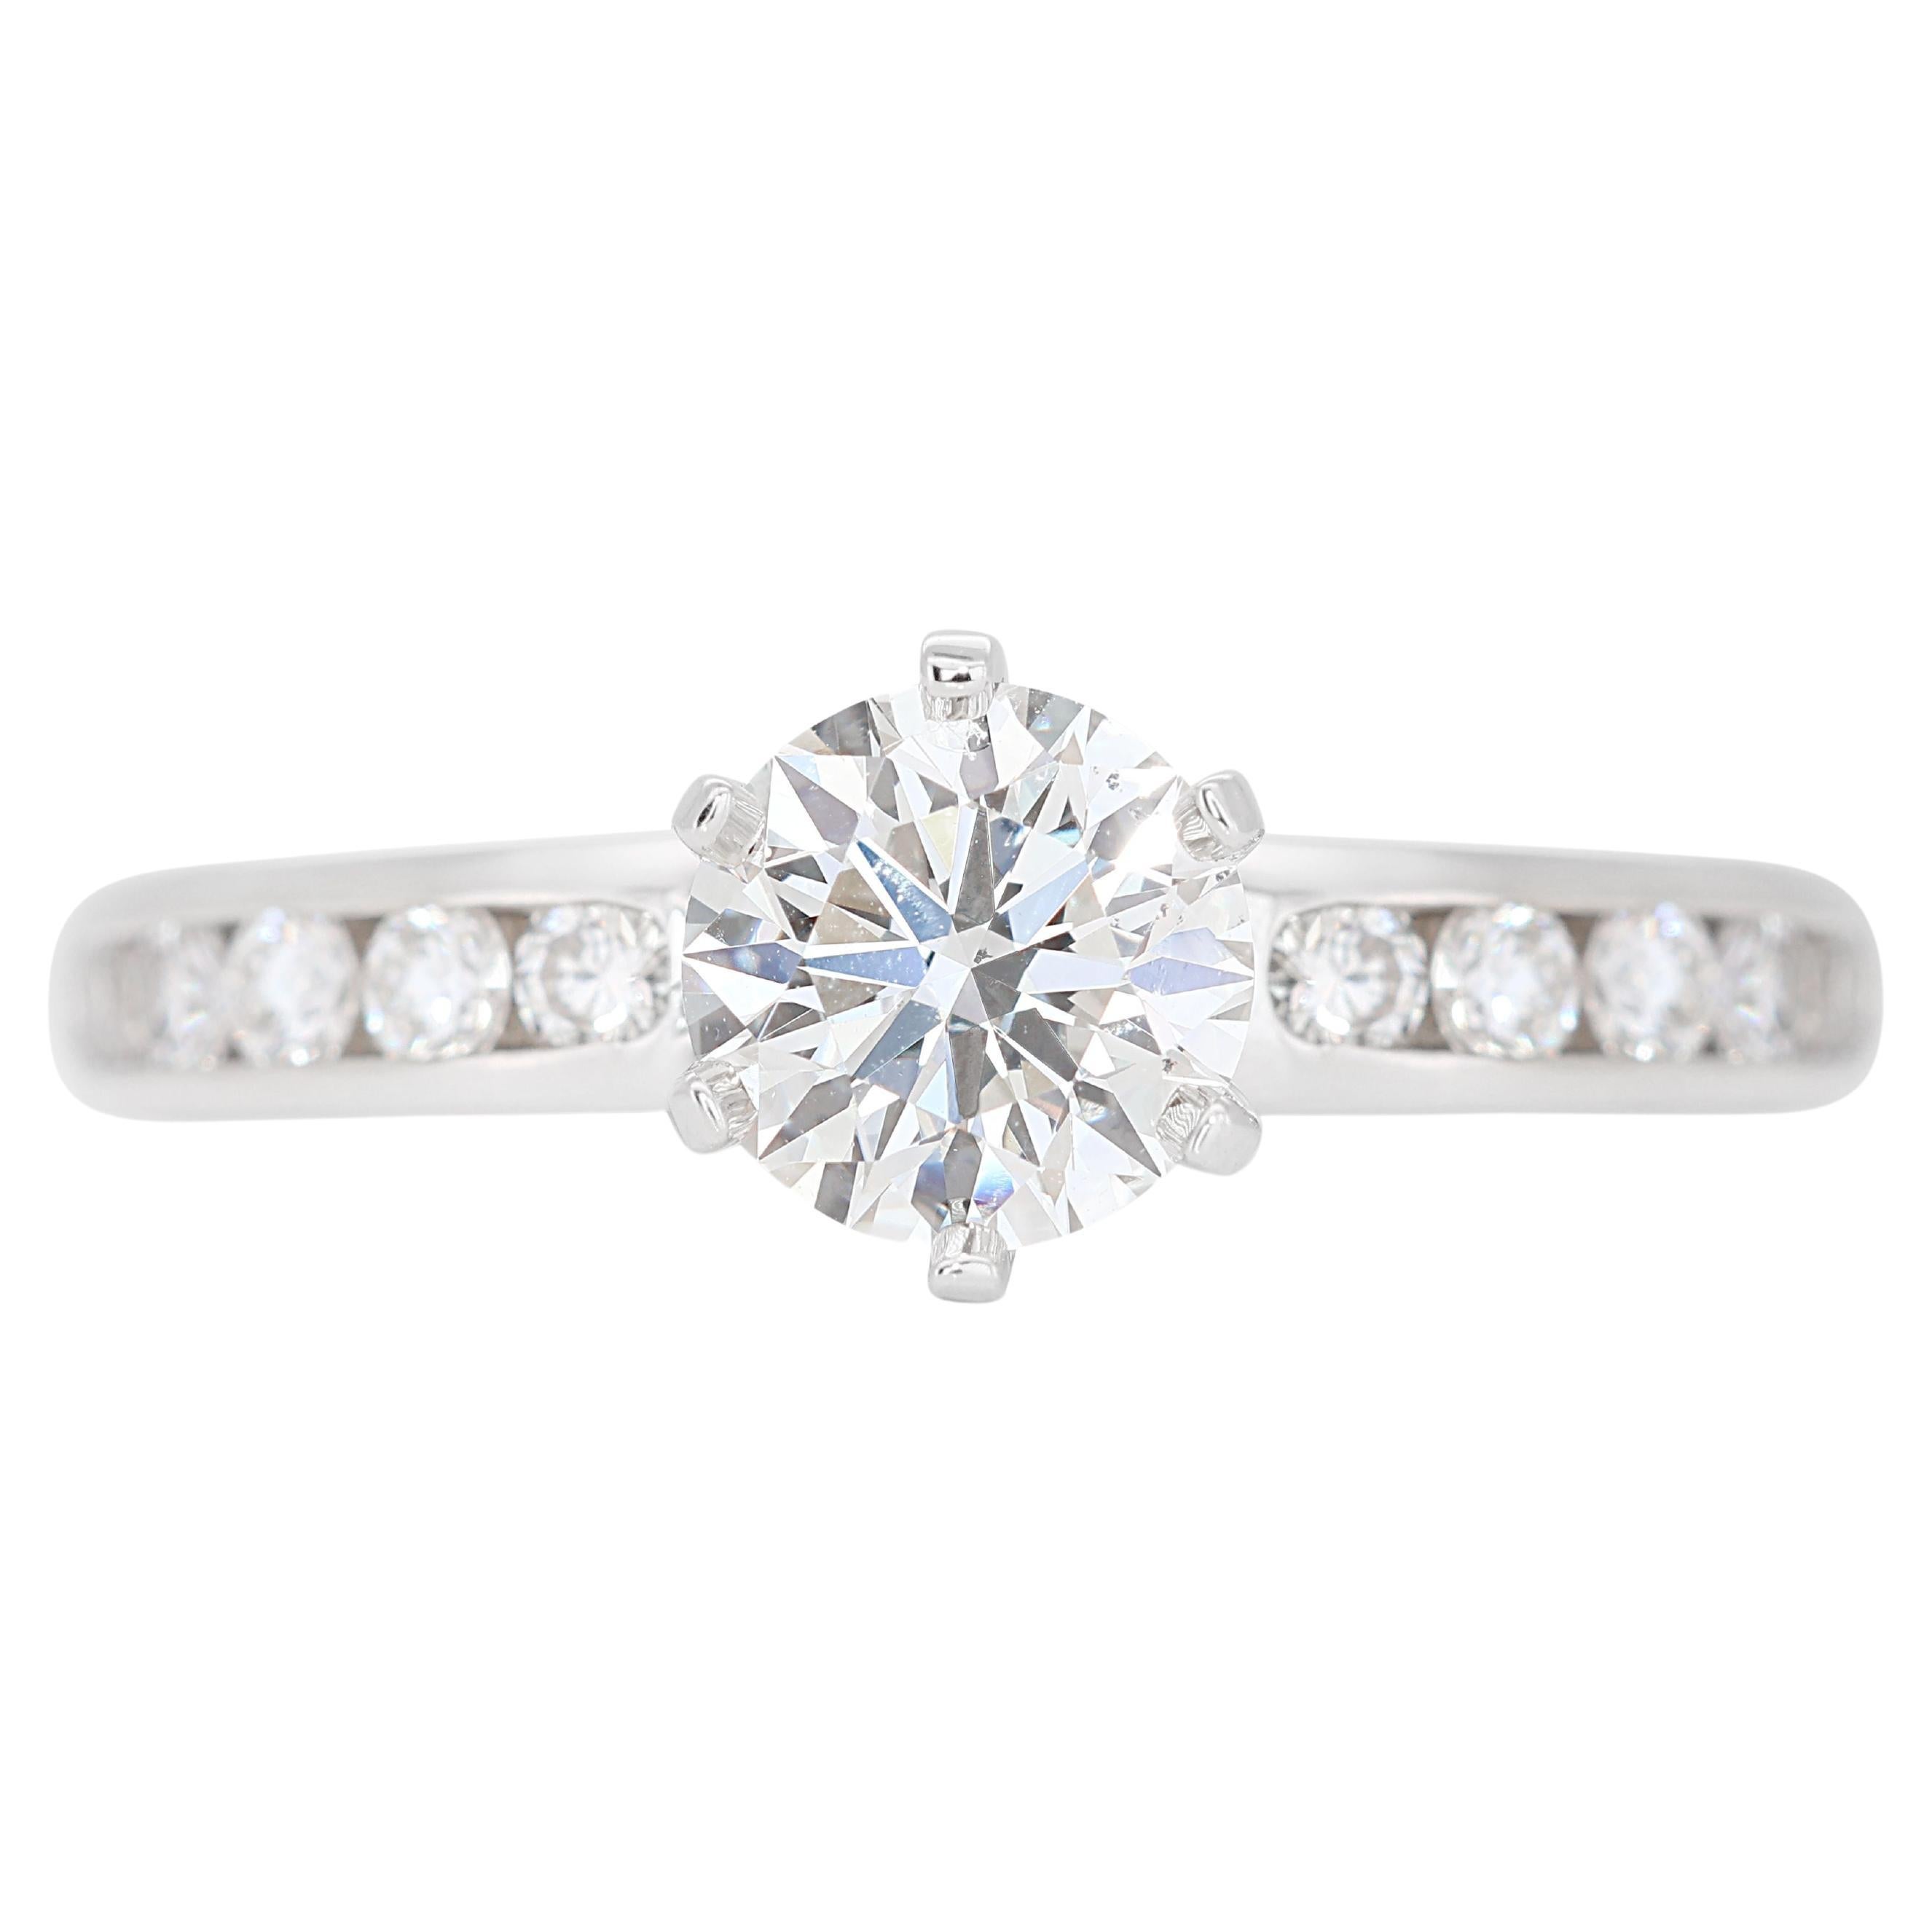 1.02ct Tiffany & Co. Diamond Ring with Sparkling Halo For Sale